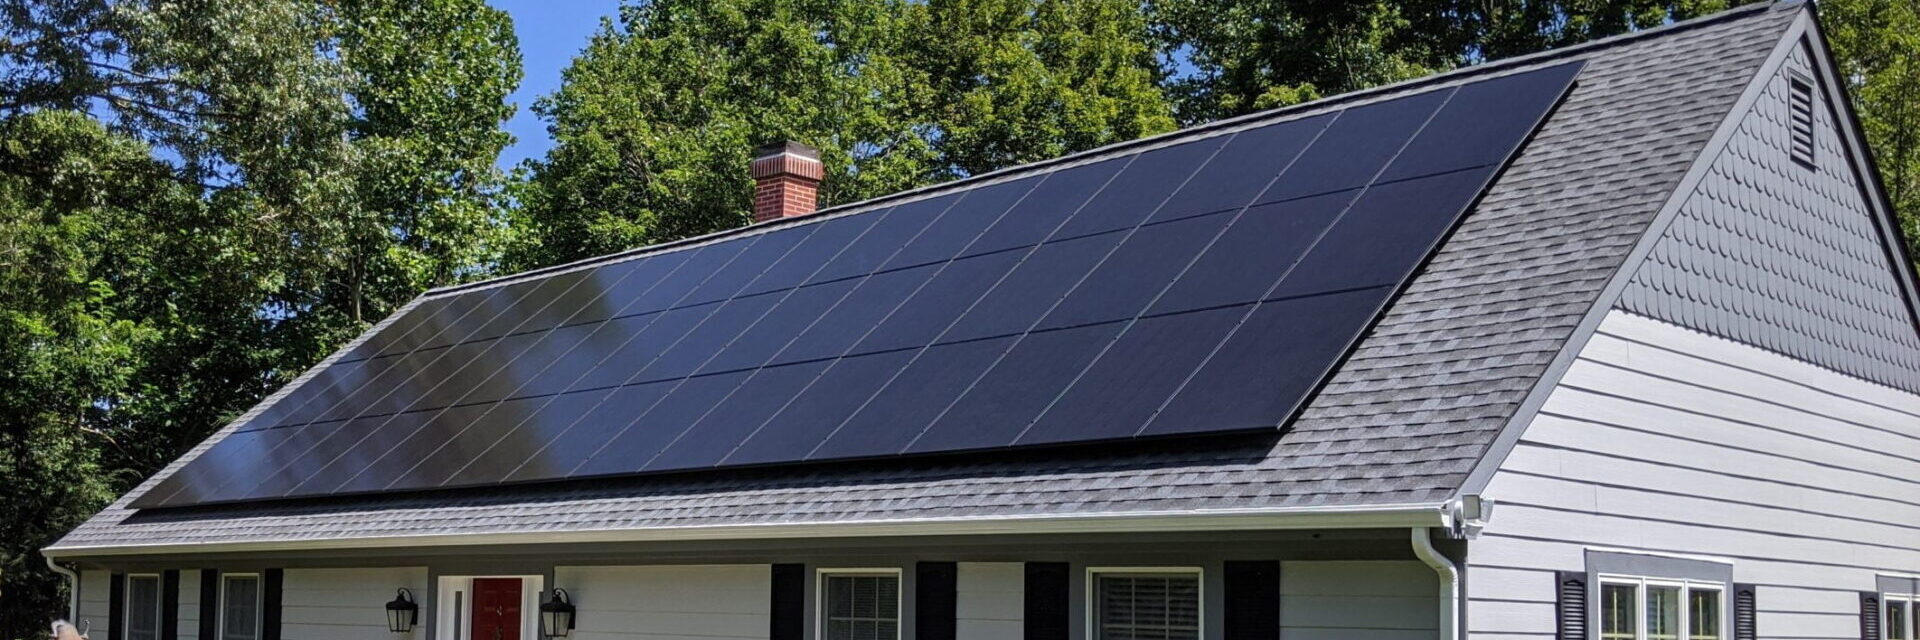 Modern Orange County VA home with locally installed solar panels on roof